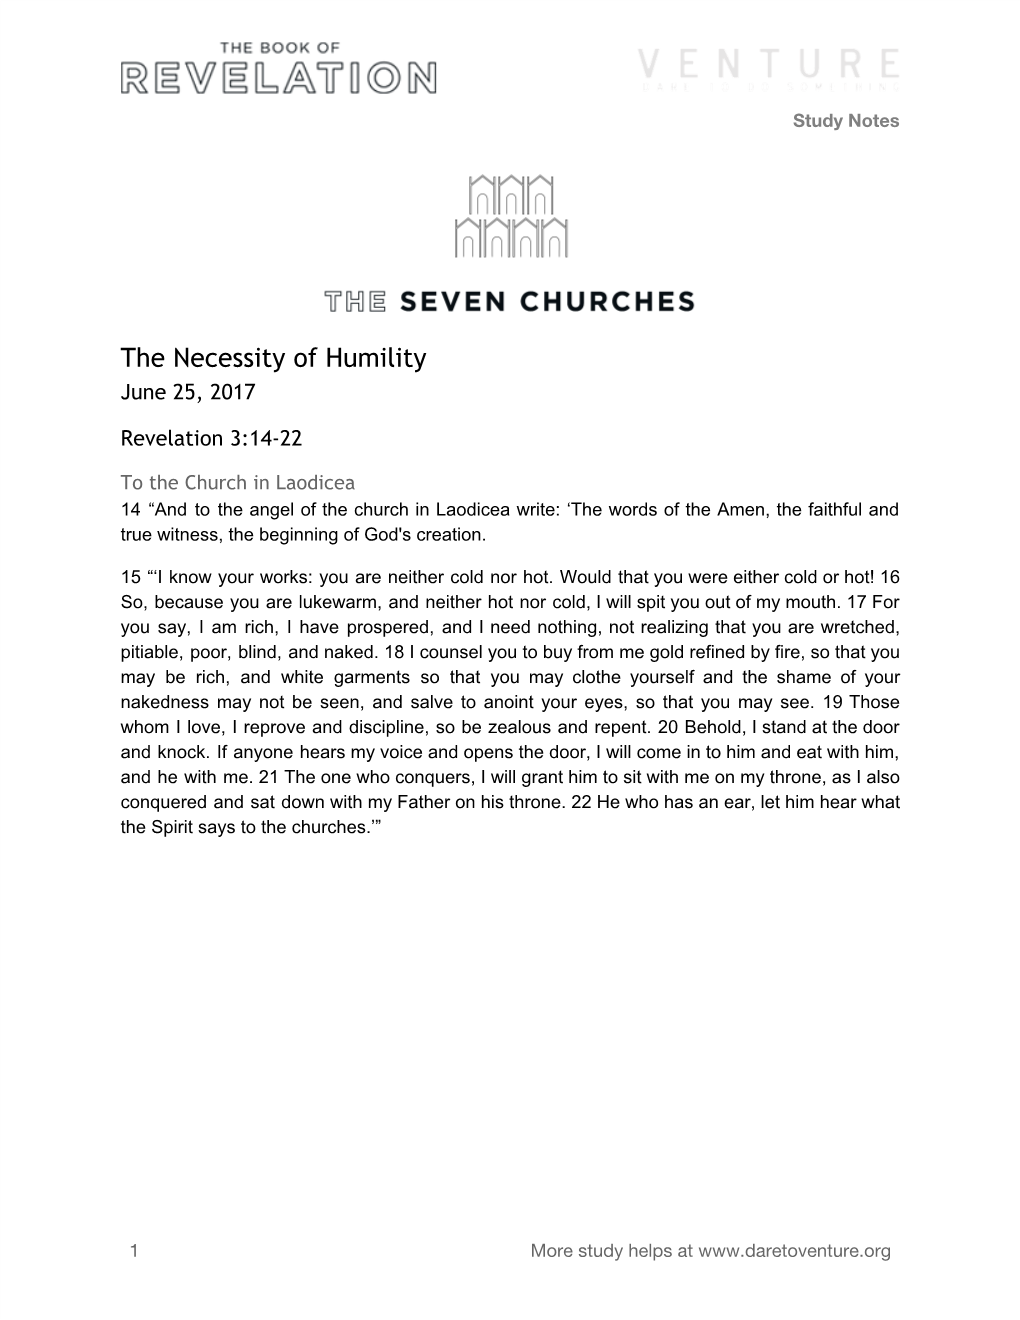 The Necessity of Humility June 25, 2017